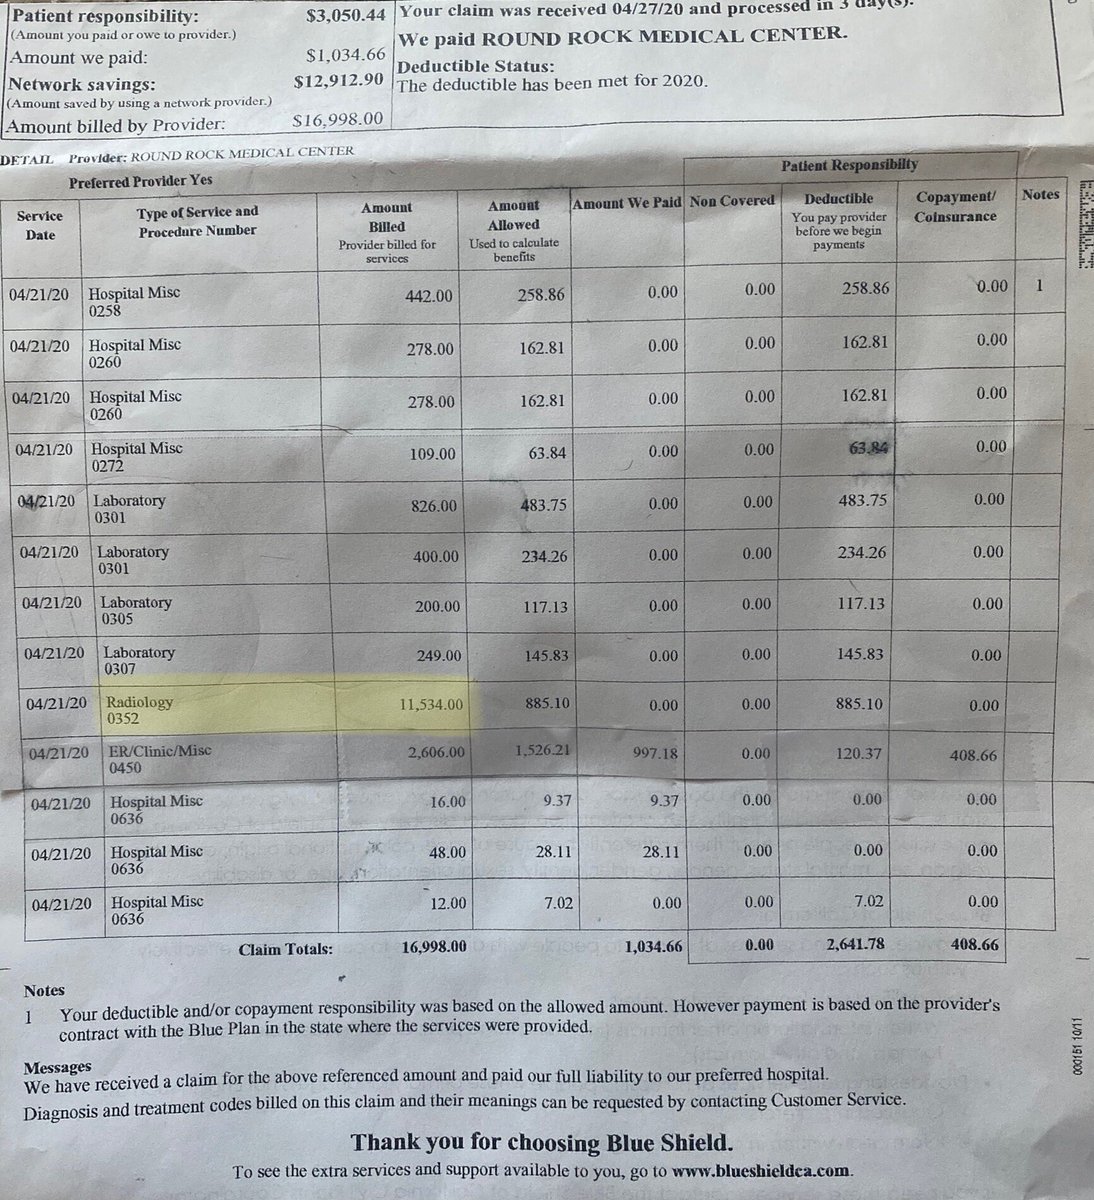 Thread: A friend had a kidney stone in April. Total ER bill was $17K. $1183 for “Hospital Misc,” $1675 for labs, $2606 for ER doc/facility, $11,534 for CT scan. 90 min visit. I called around & could order the same CT for $495 cash and a doctor would pay $11.50 for those labs. 1/